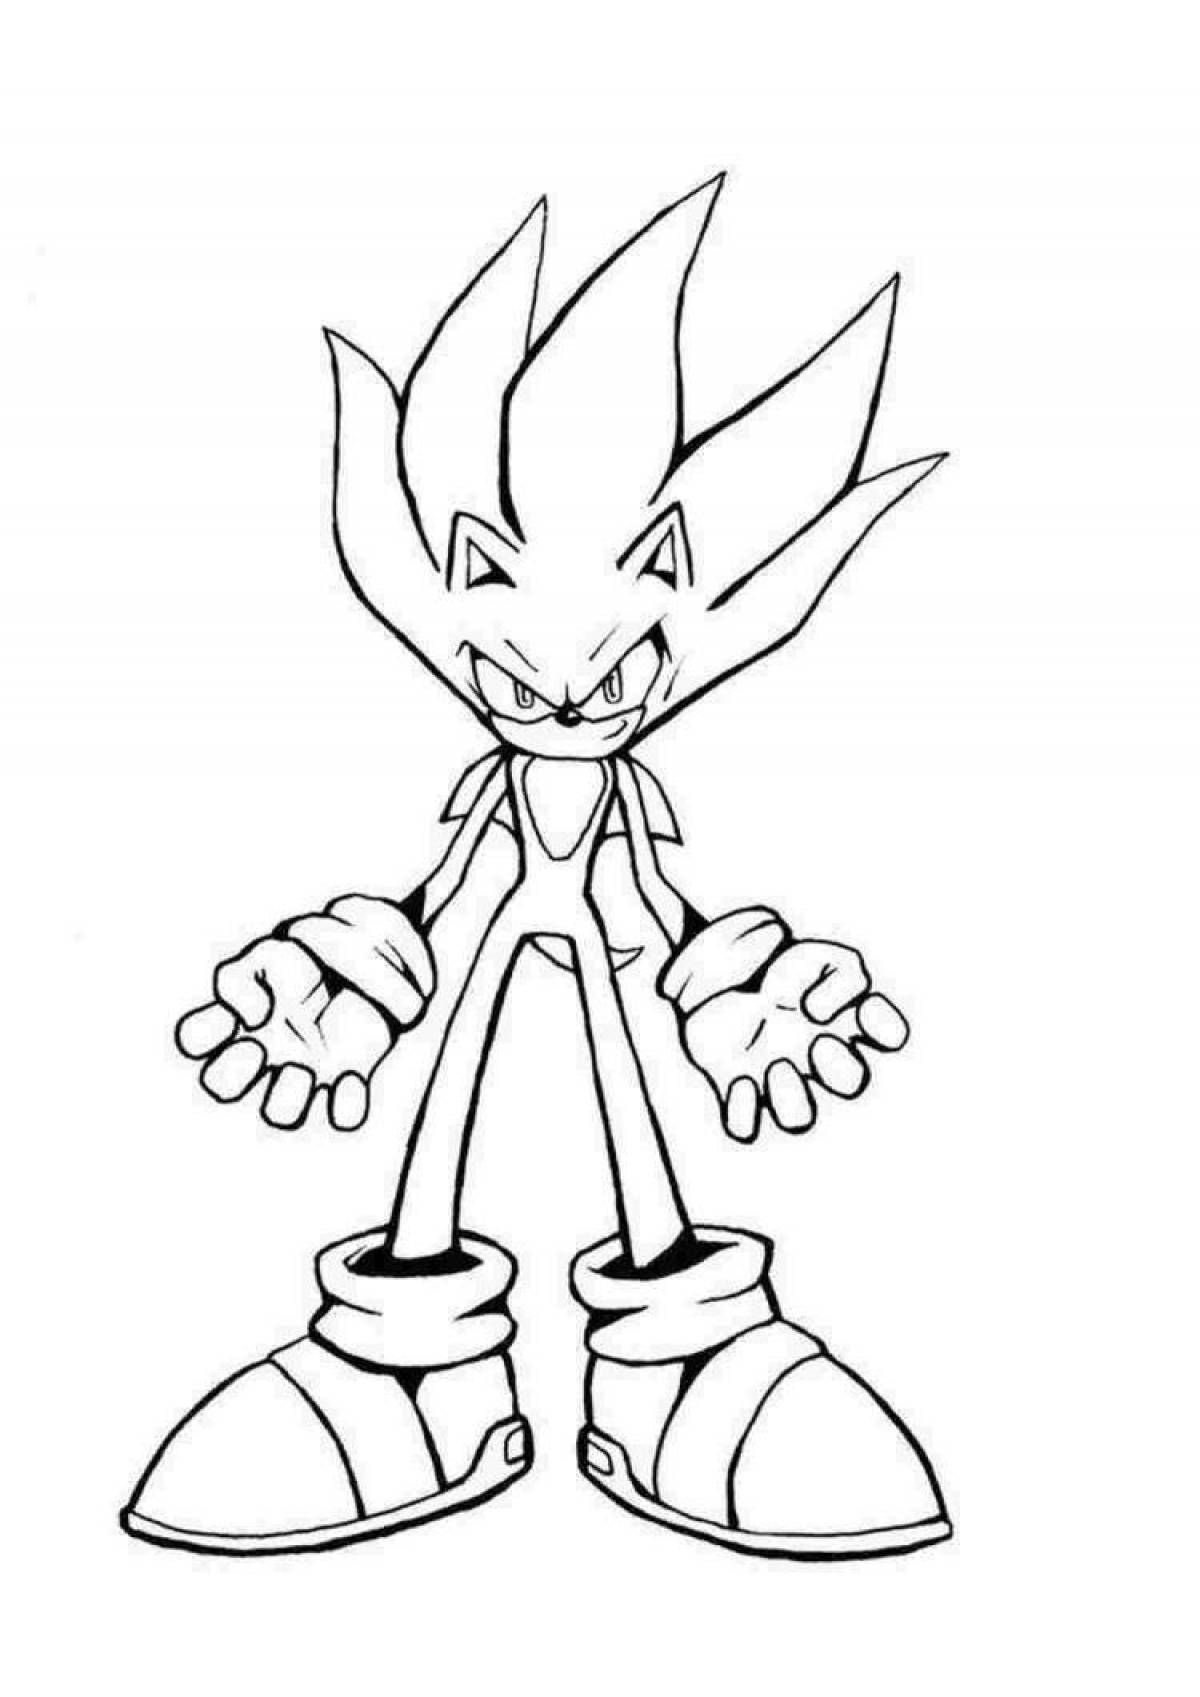 Darkspine sonic coloring pages